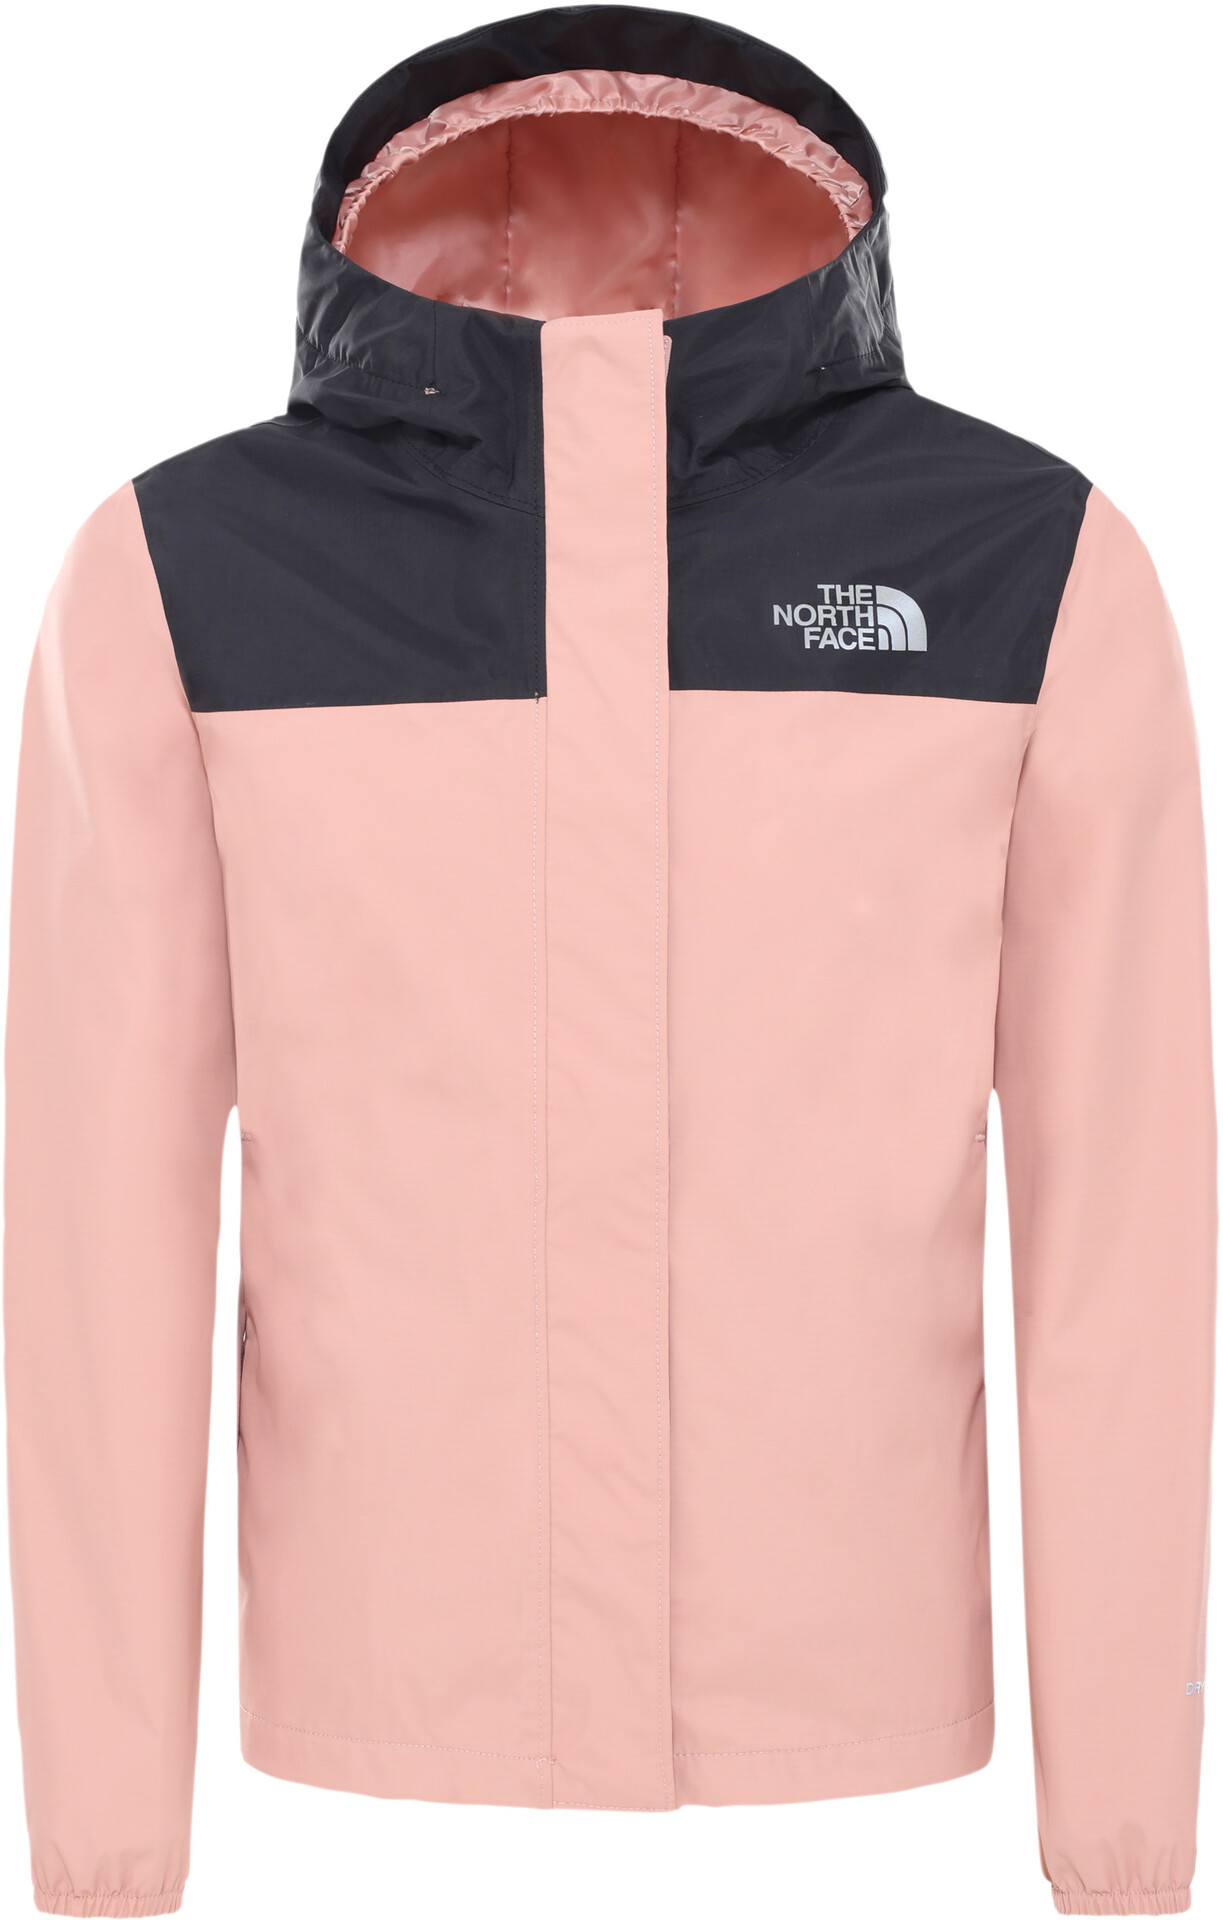 The North Face Resolve Reflective 